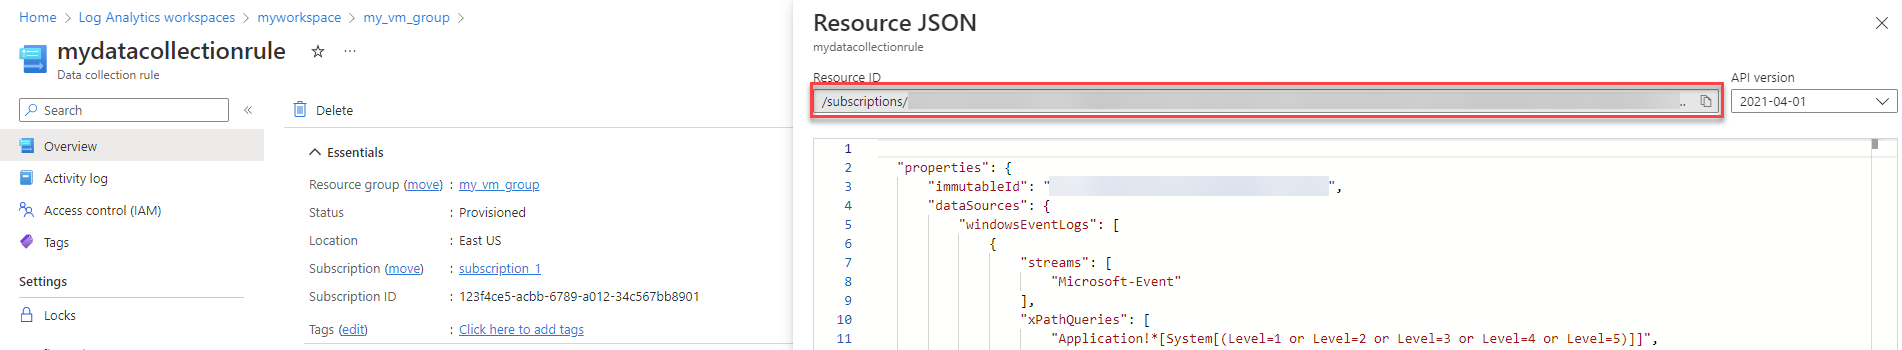 Screenshot that shows the data collection endpoint JSON view.